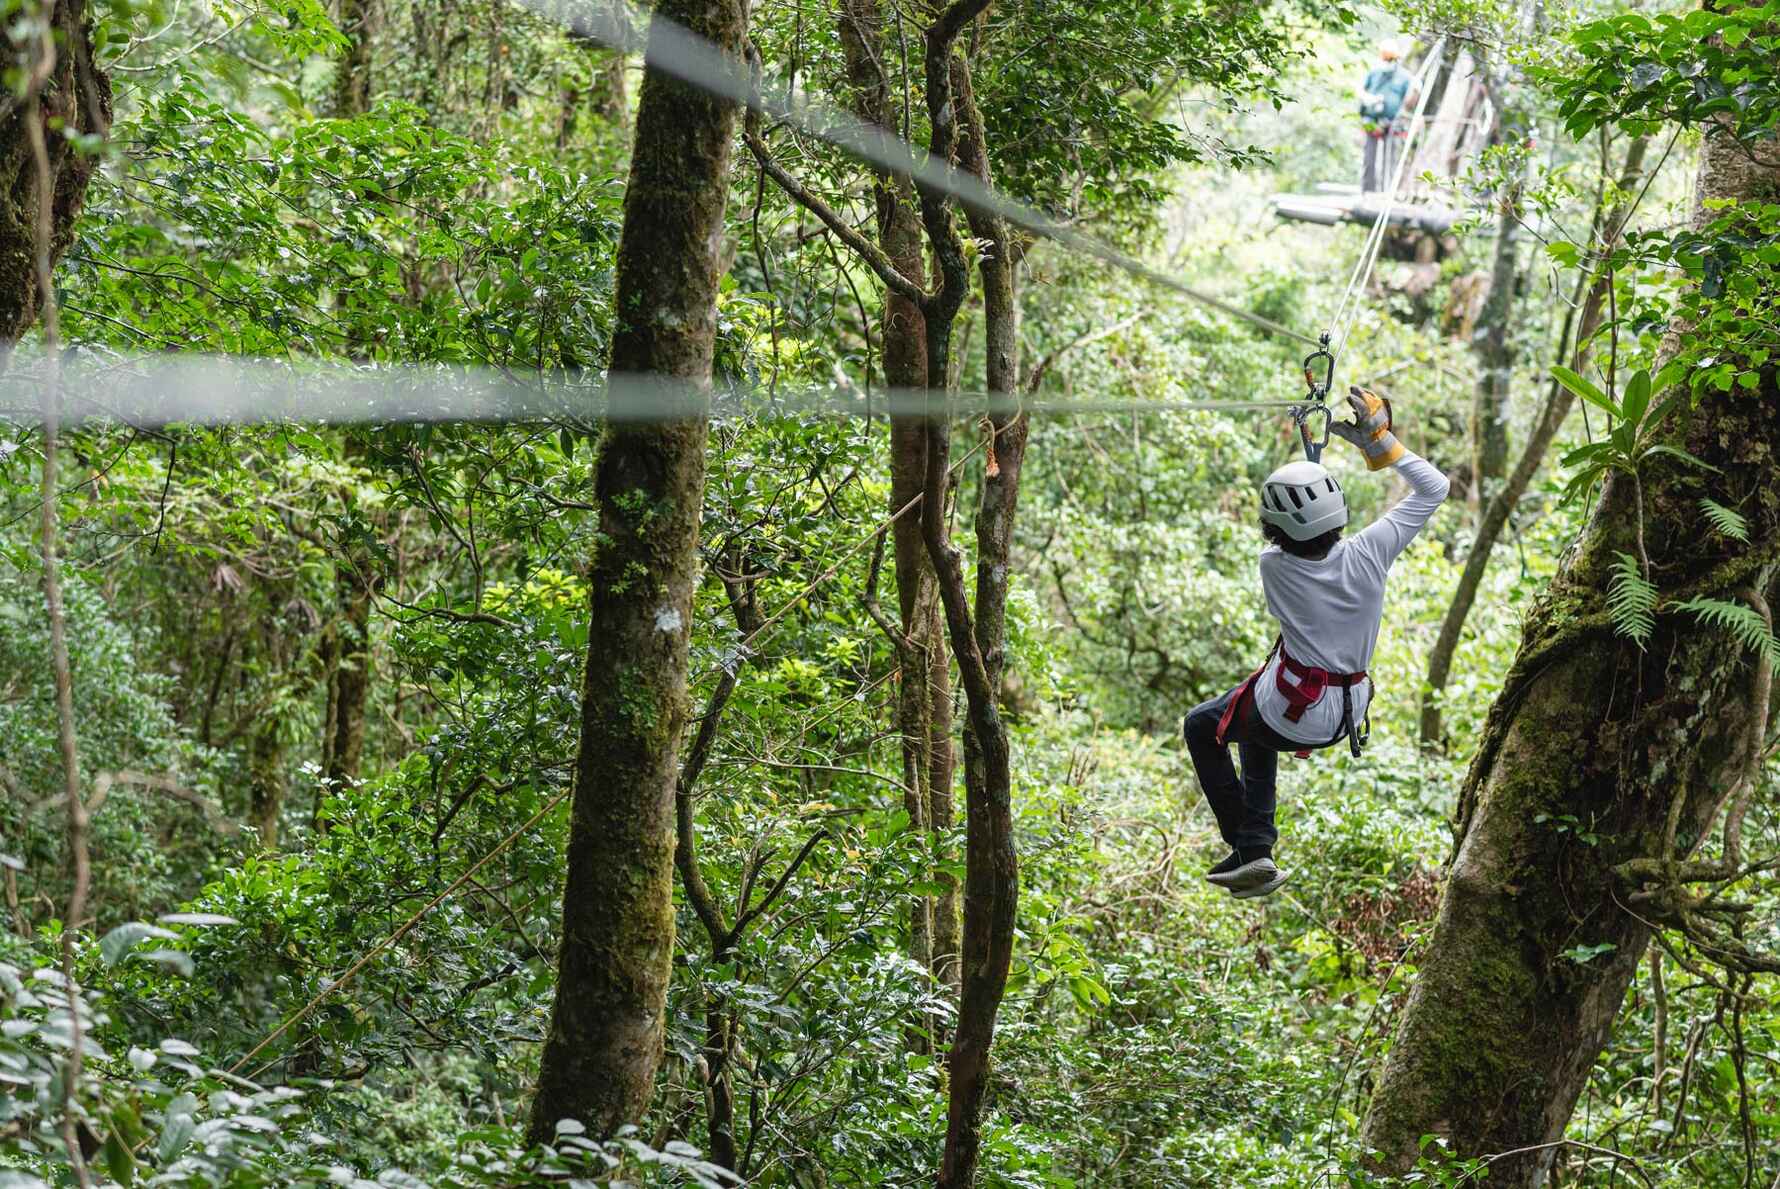 Image showing a woman ziplining in a forest in Costa Rica